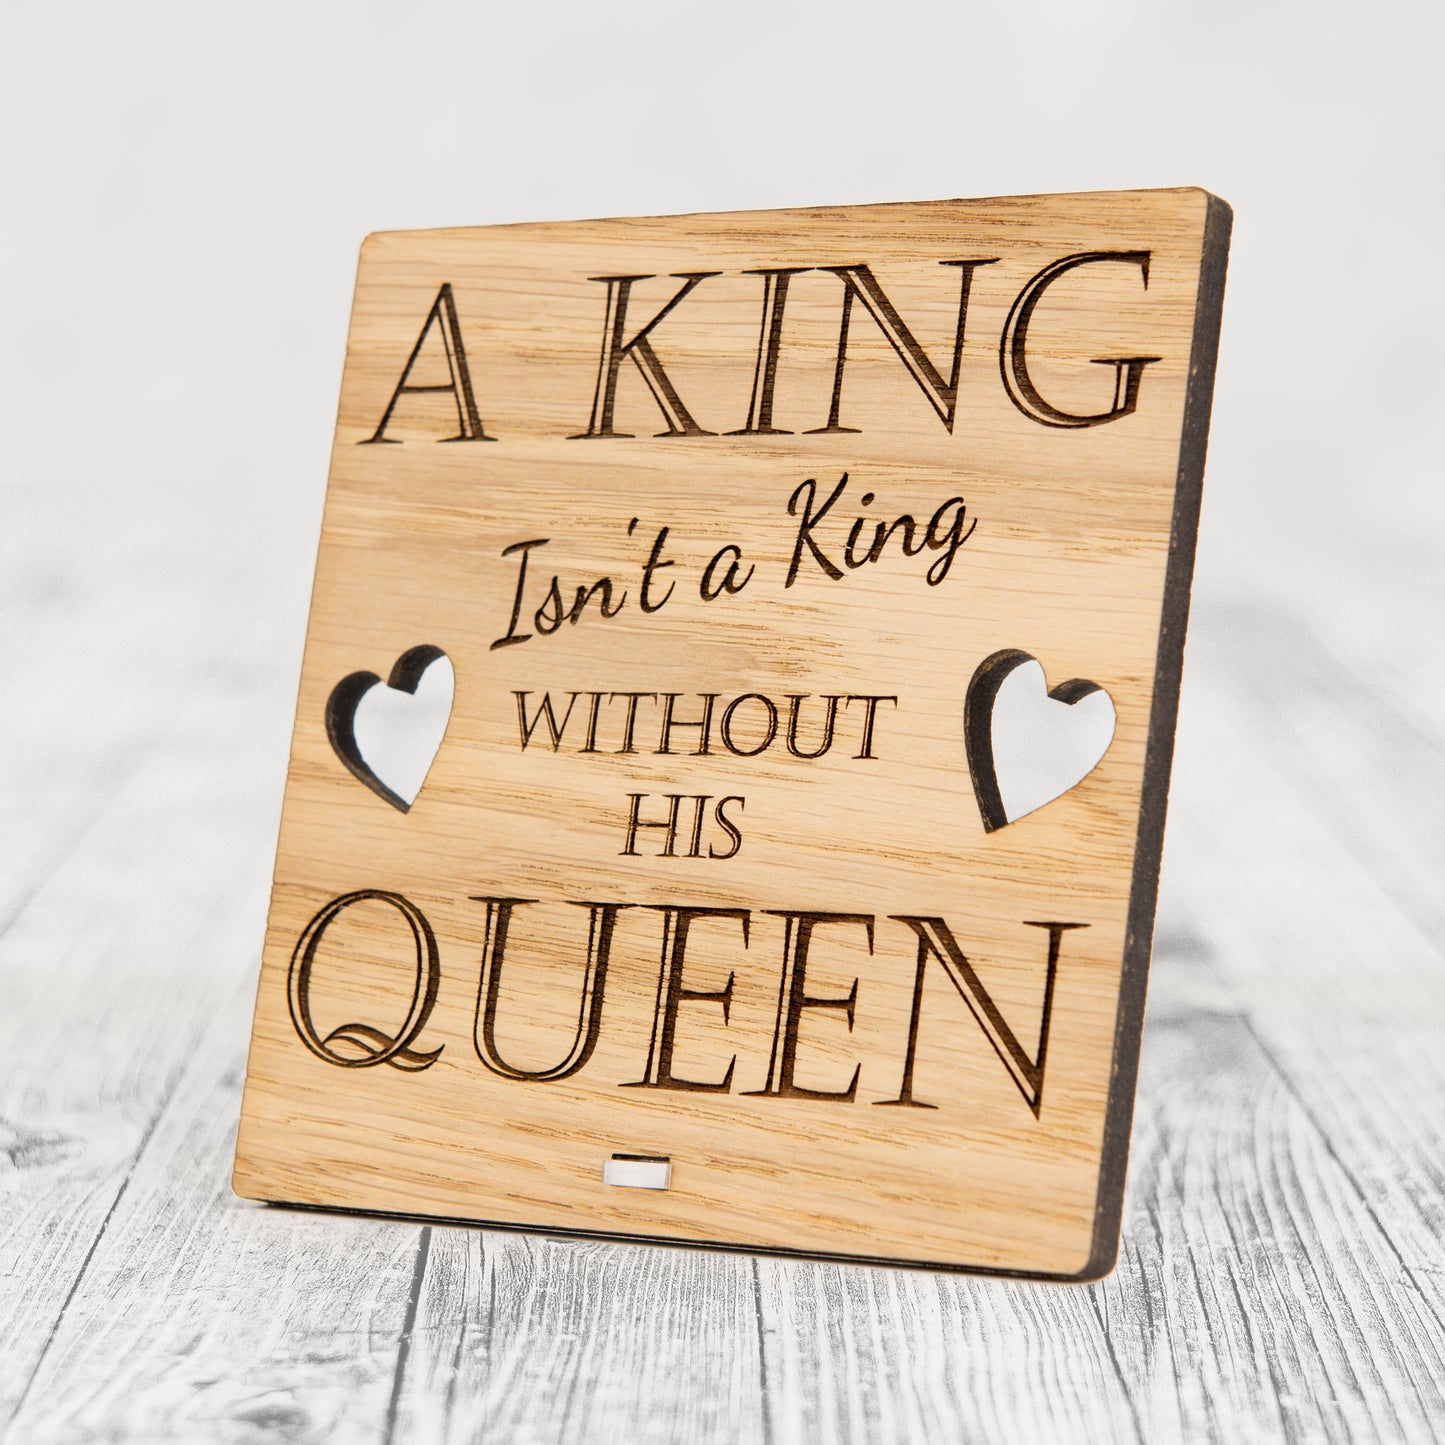 A King Is Not A King - Without His Queen - Valentines Day Wooden Plaque